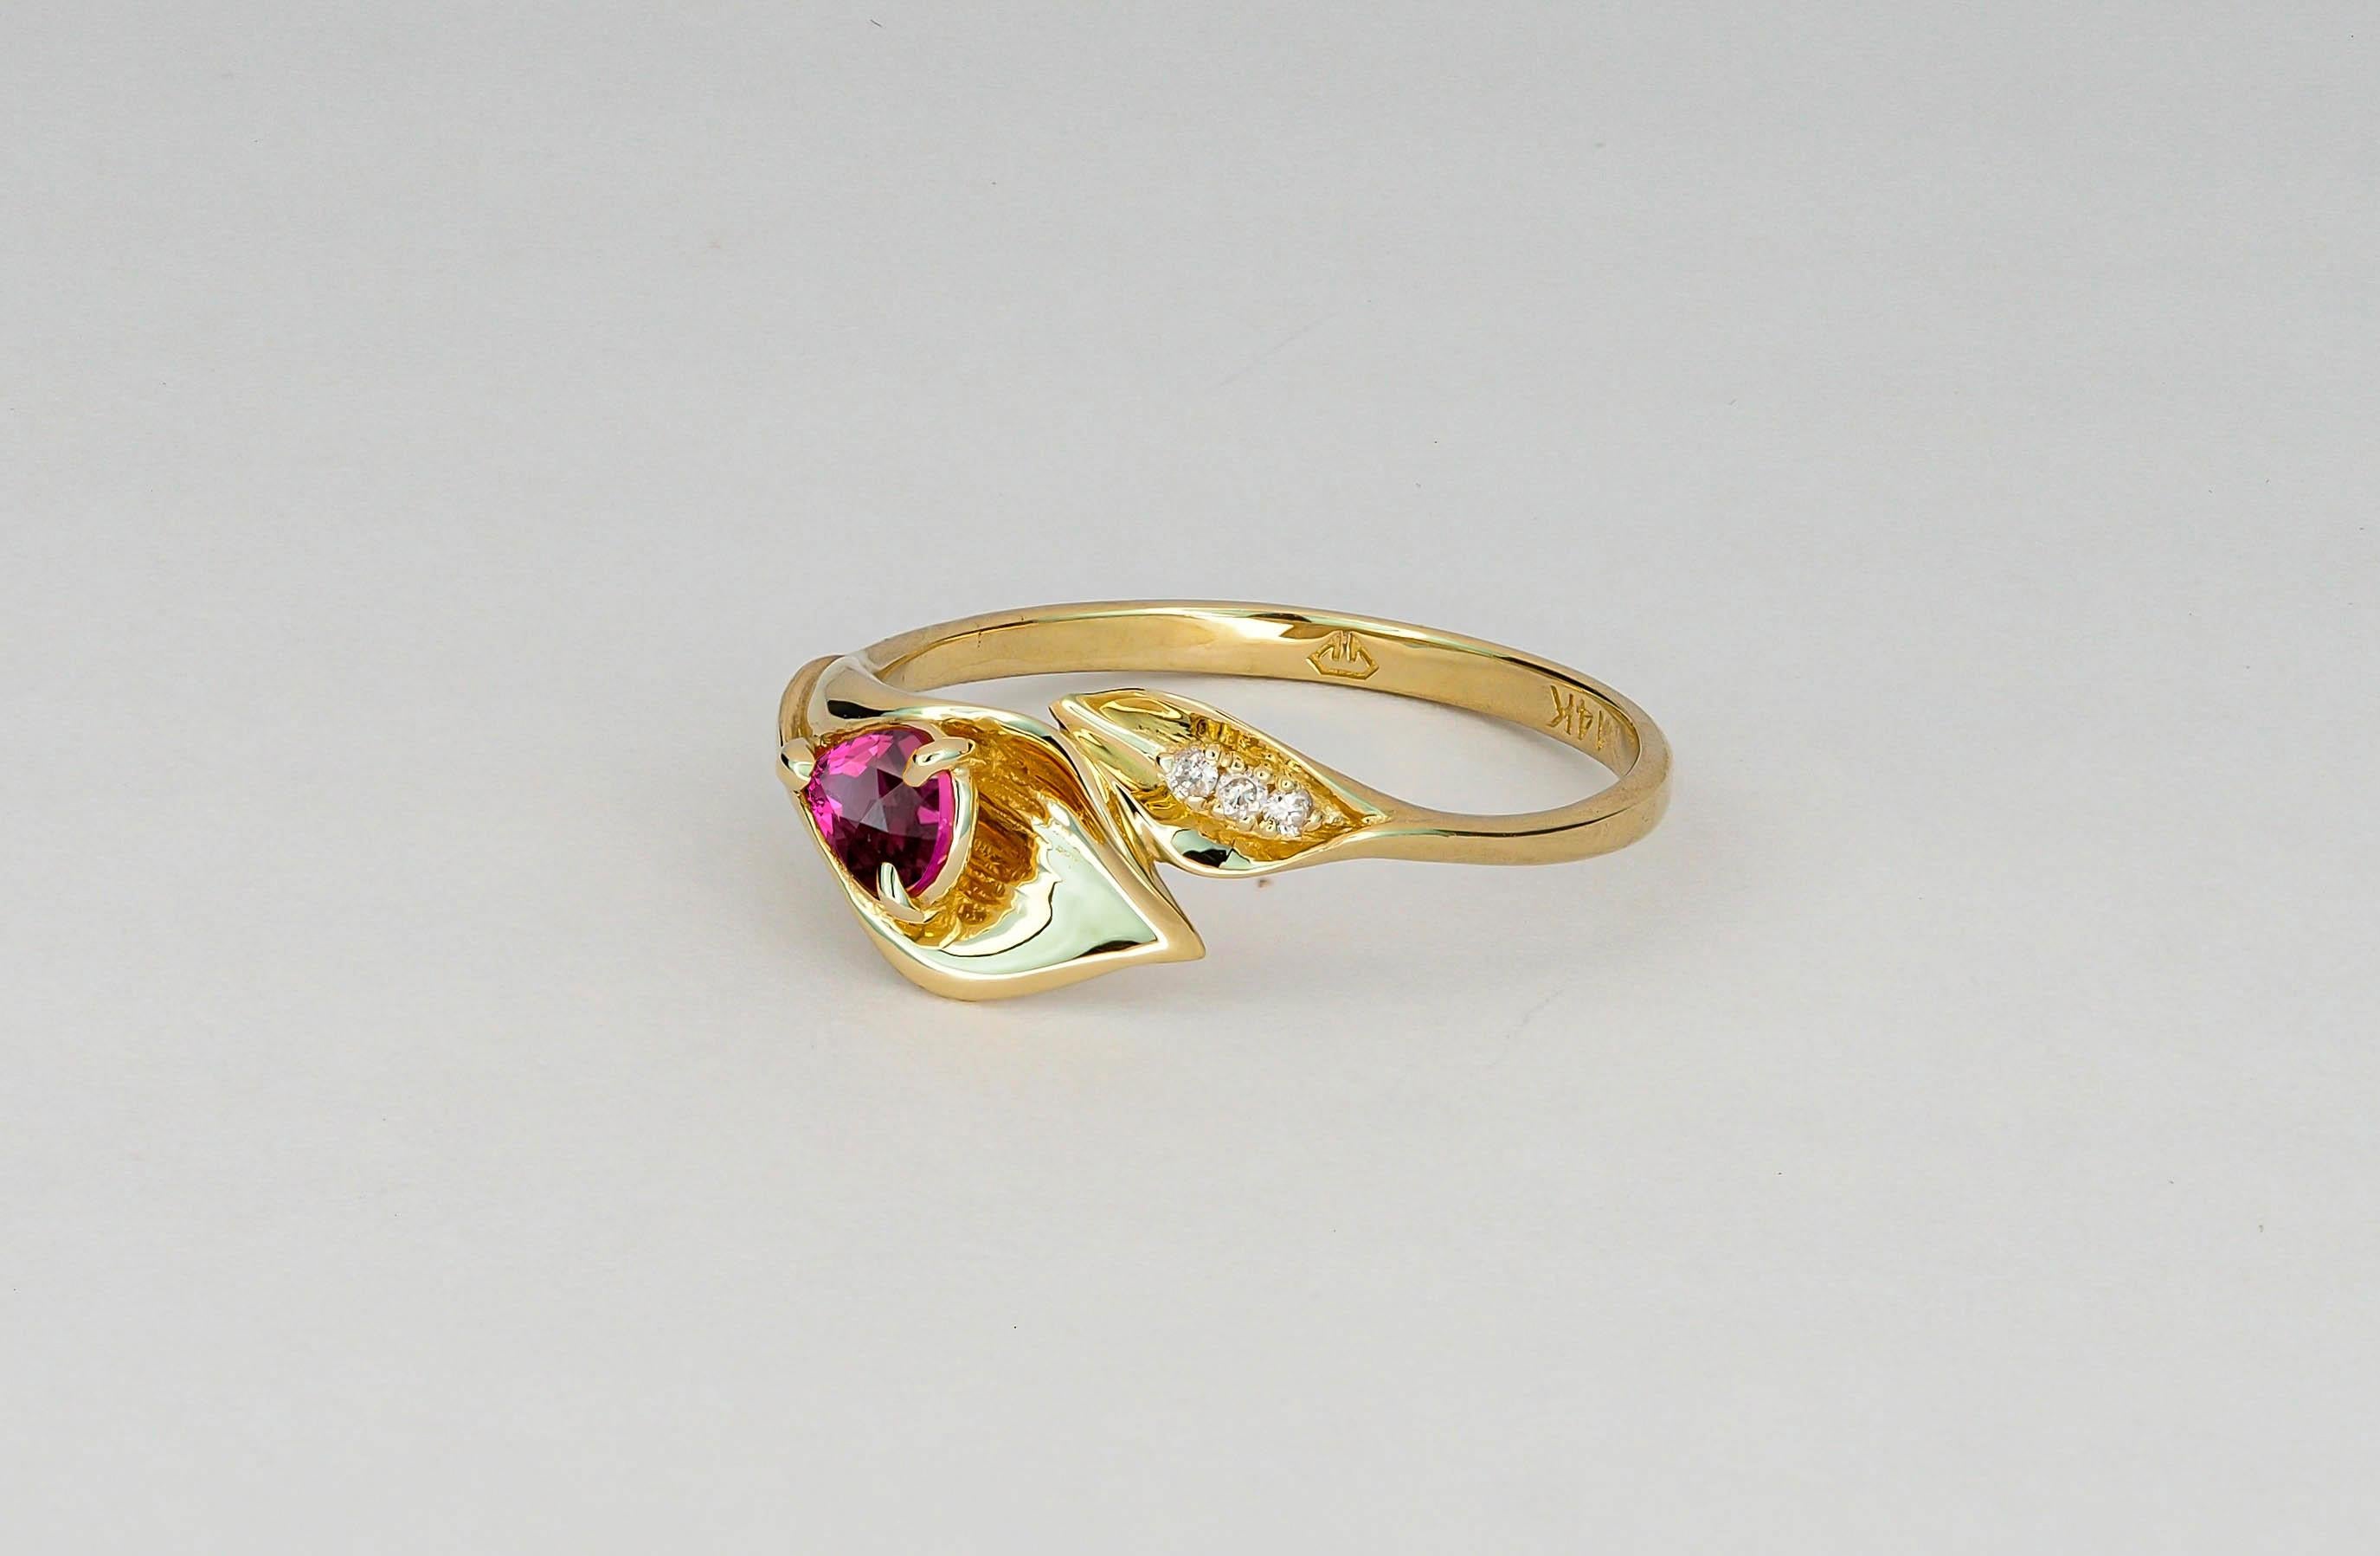 Modern Lily Calla Gold Ring, 14 Karat Gold Ring with Garnet and Diamonds For Sale